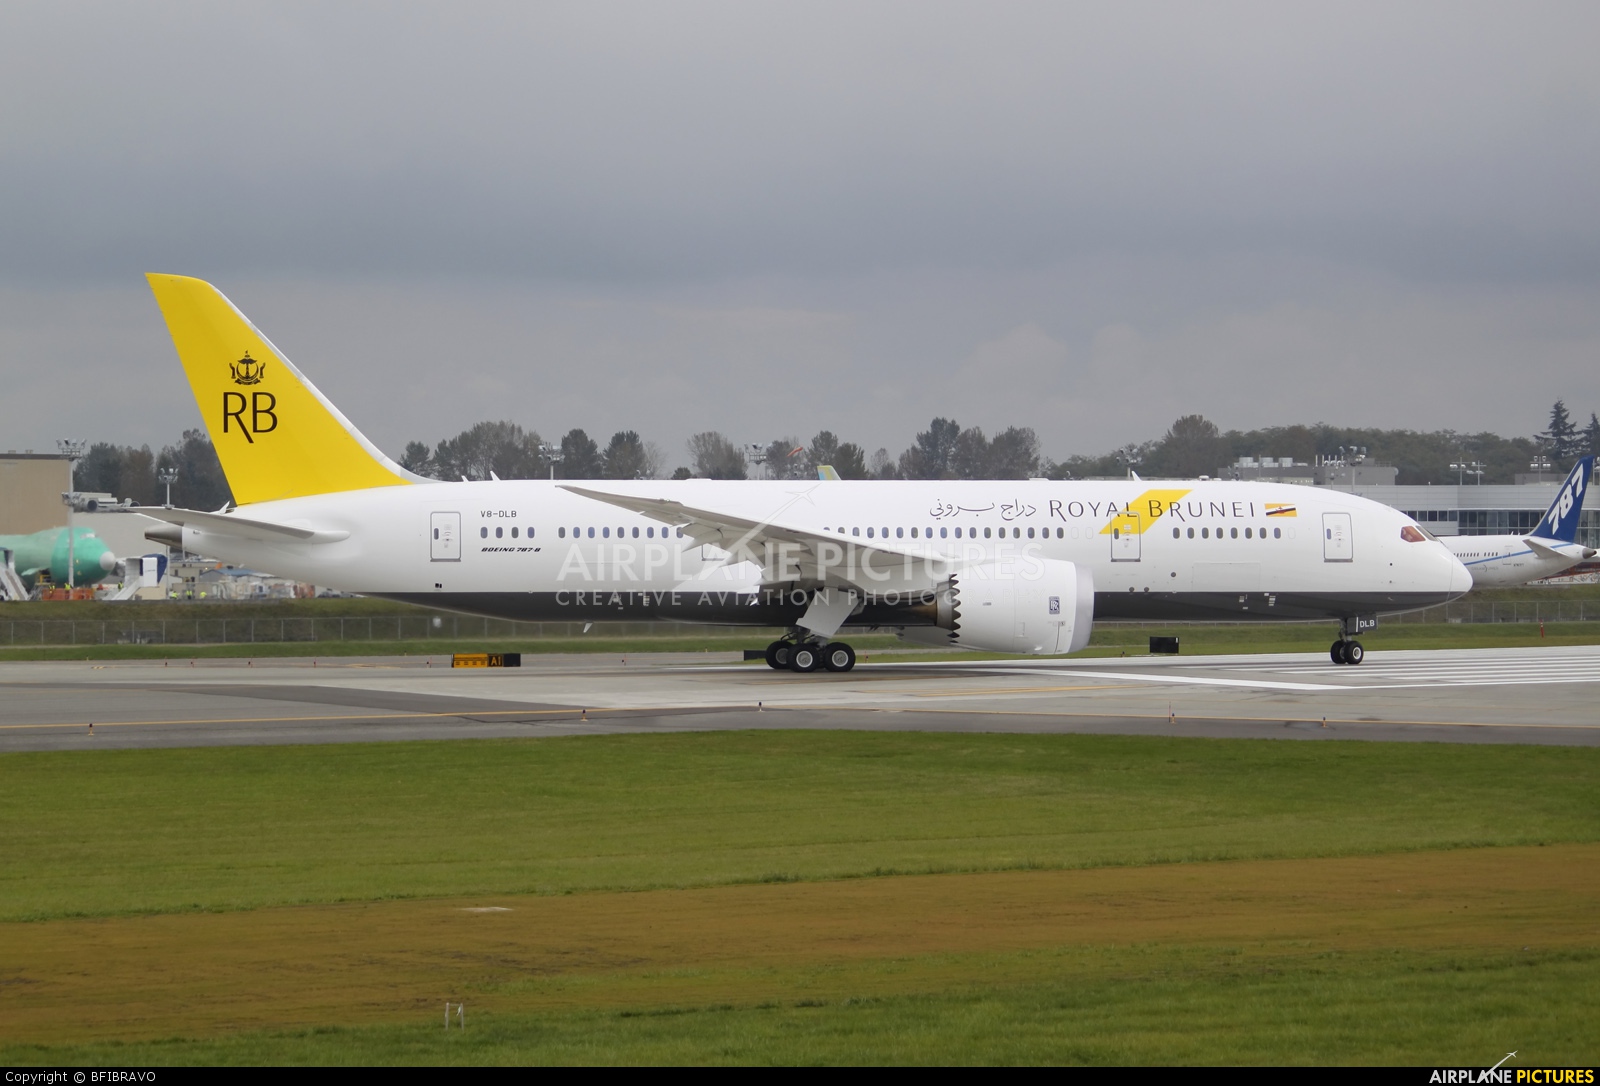 Royal Brunei Airlines V8-DLB aircraft at Everett - Snohomish County / Paine Field